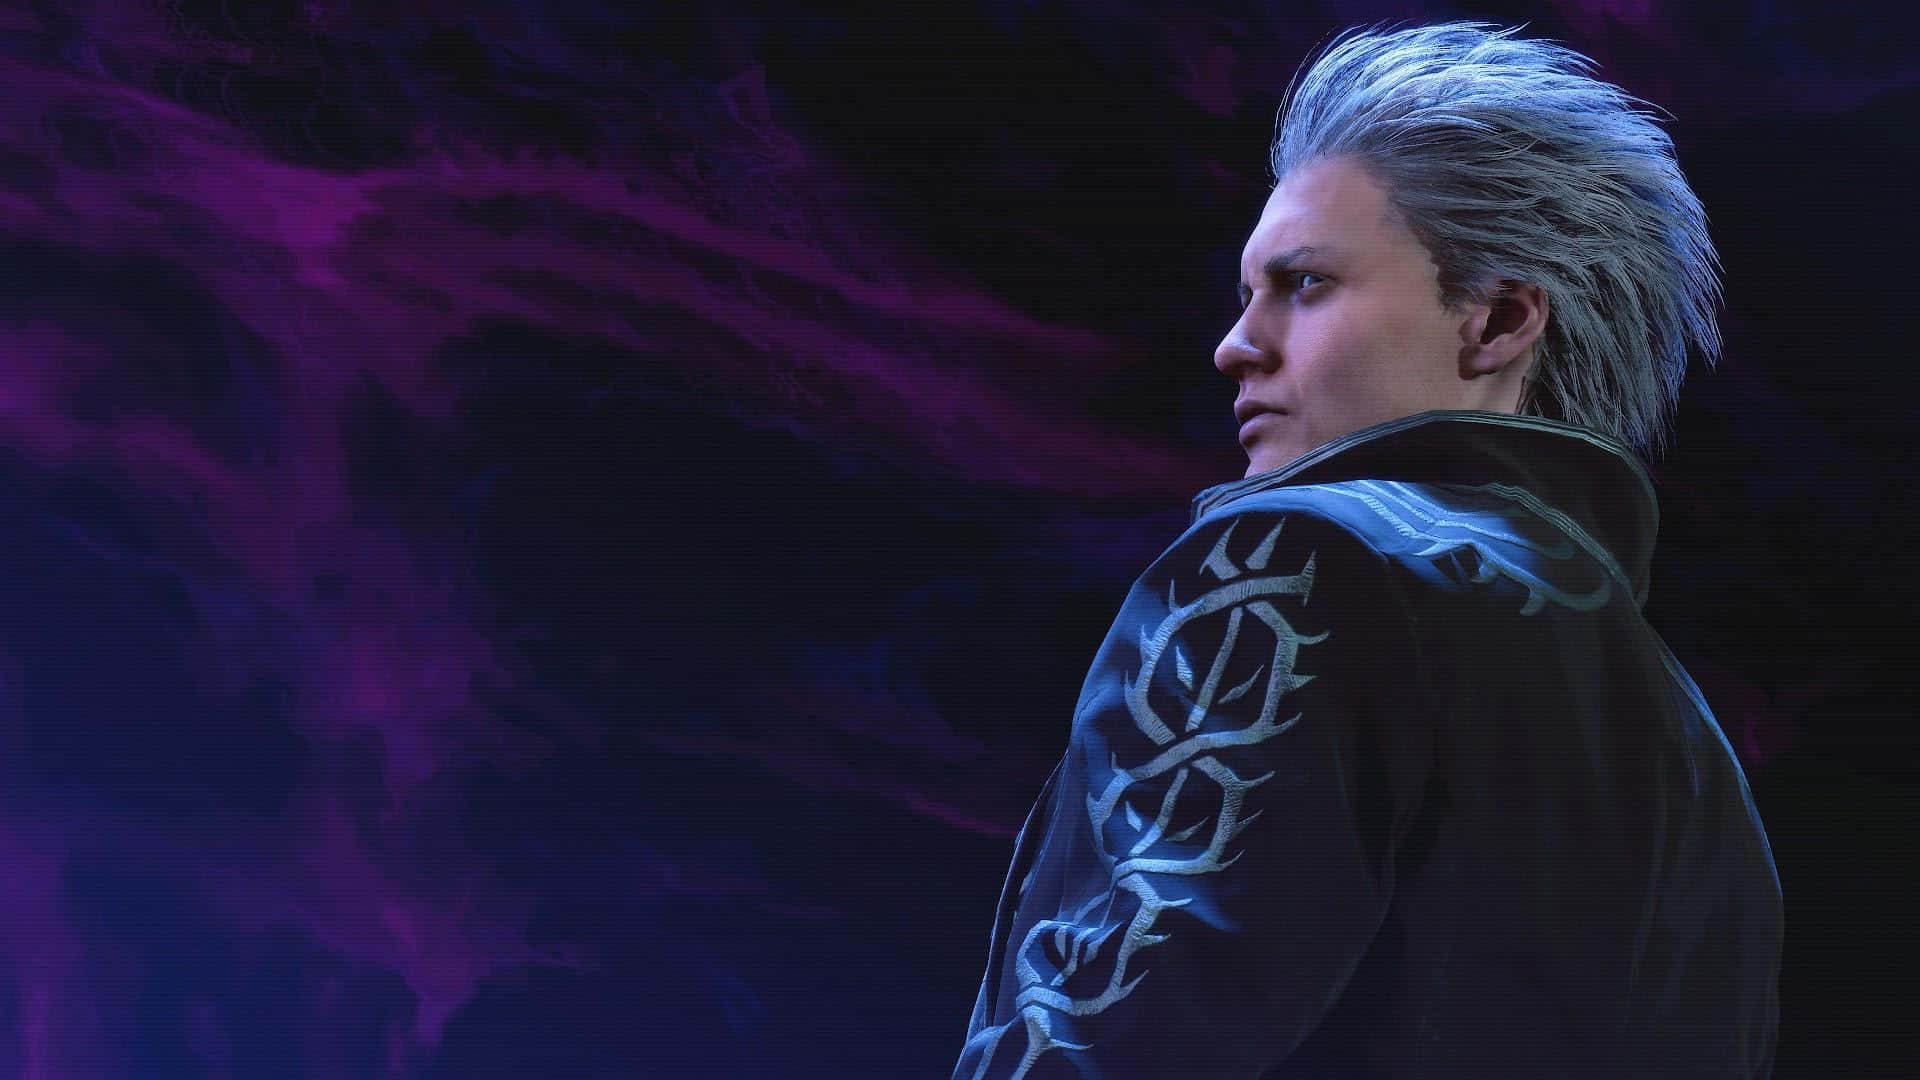 Vergil Devil May Cry Brooding Portrait Wallpaper